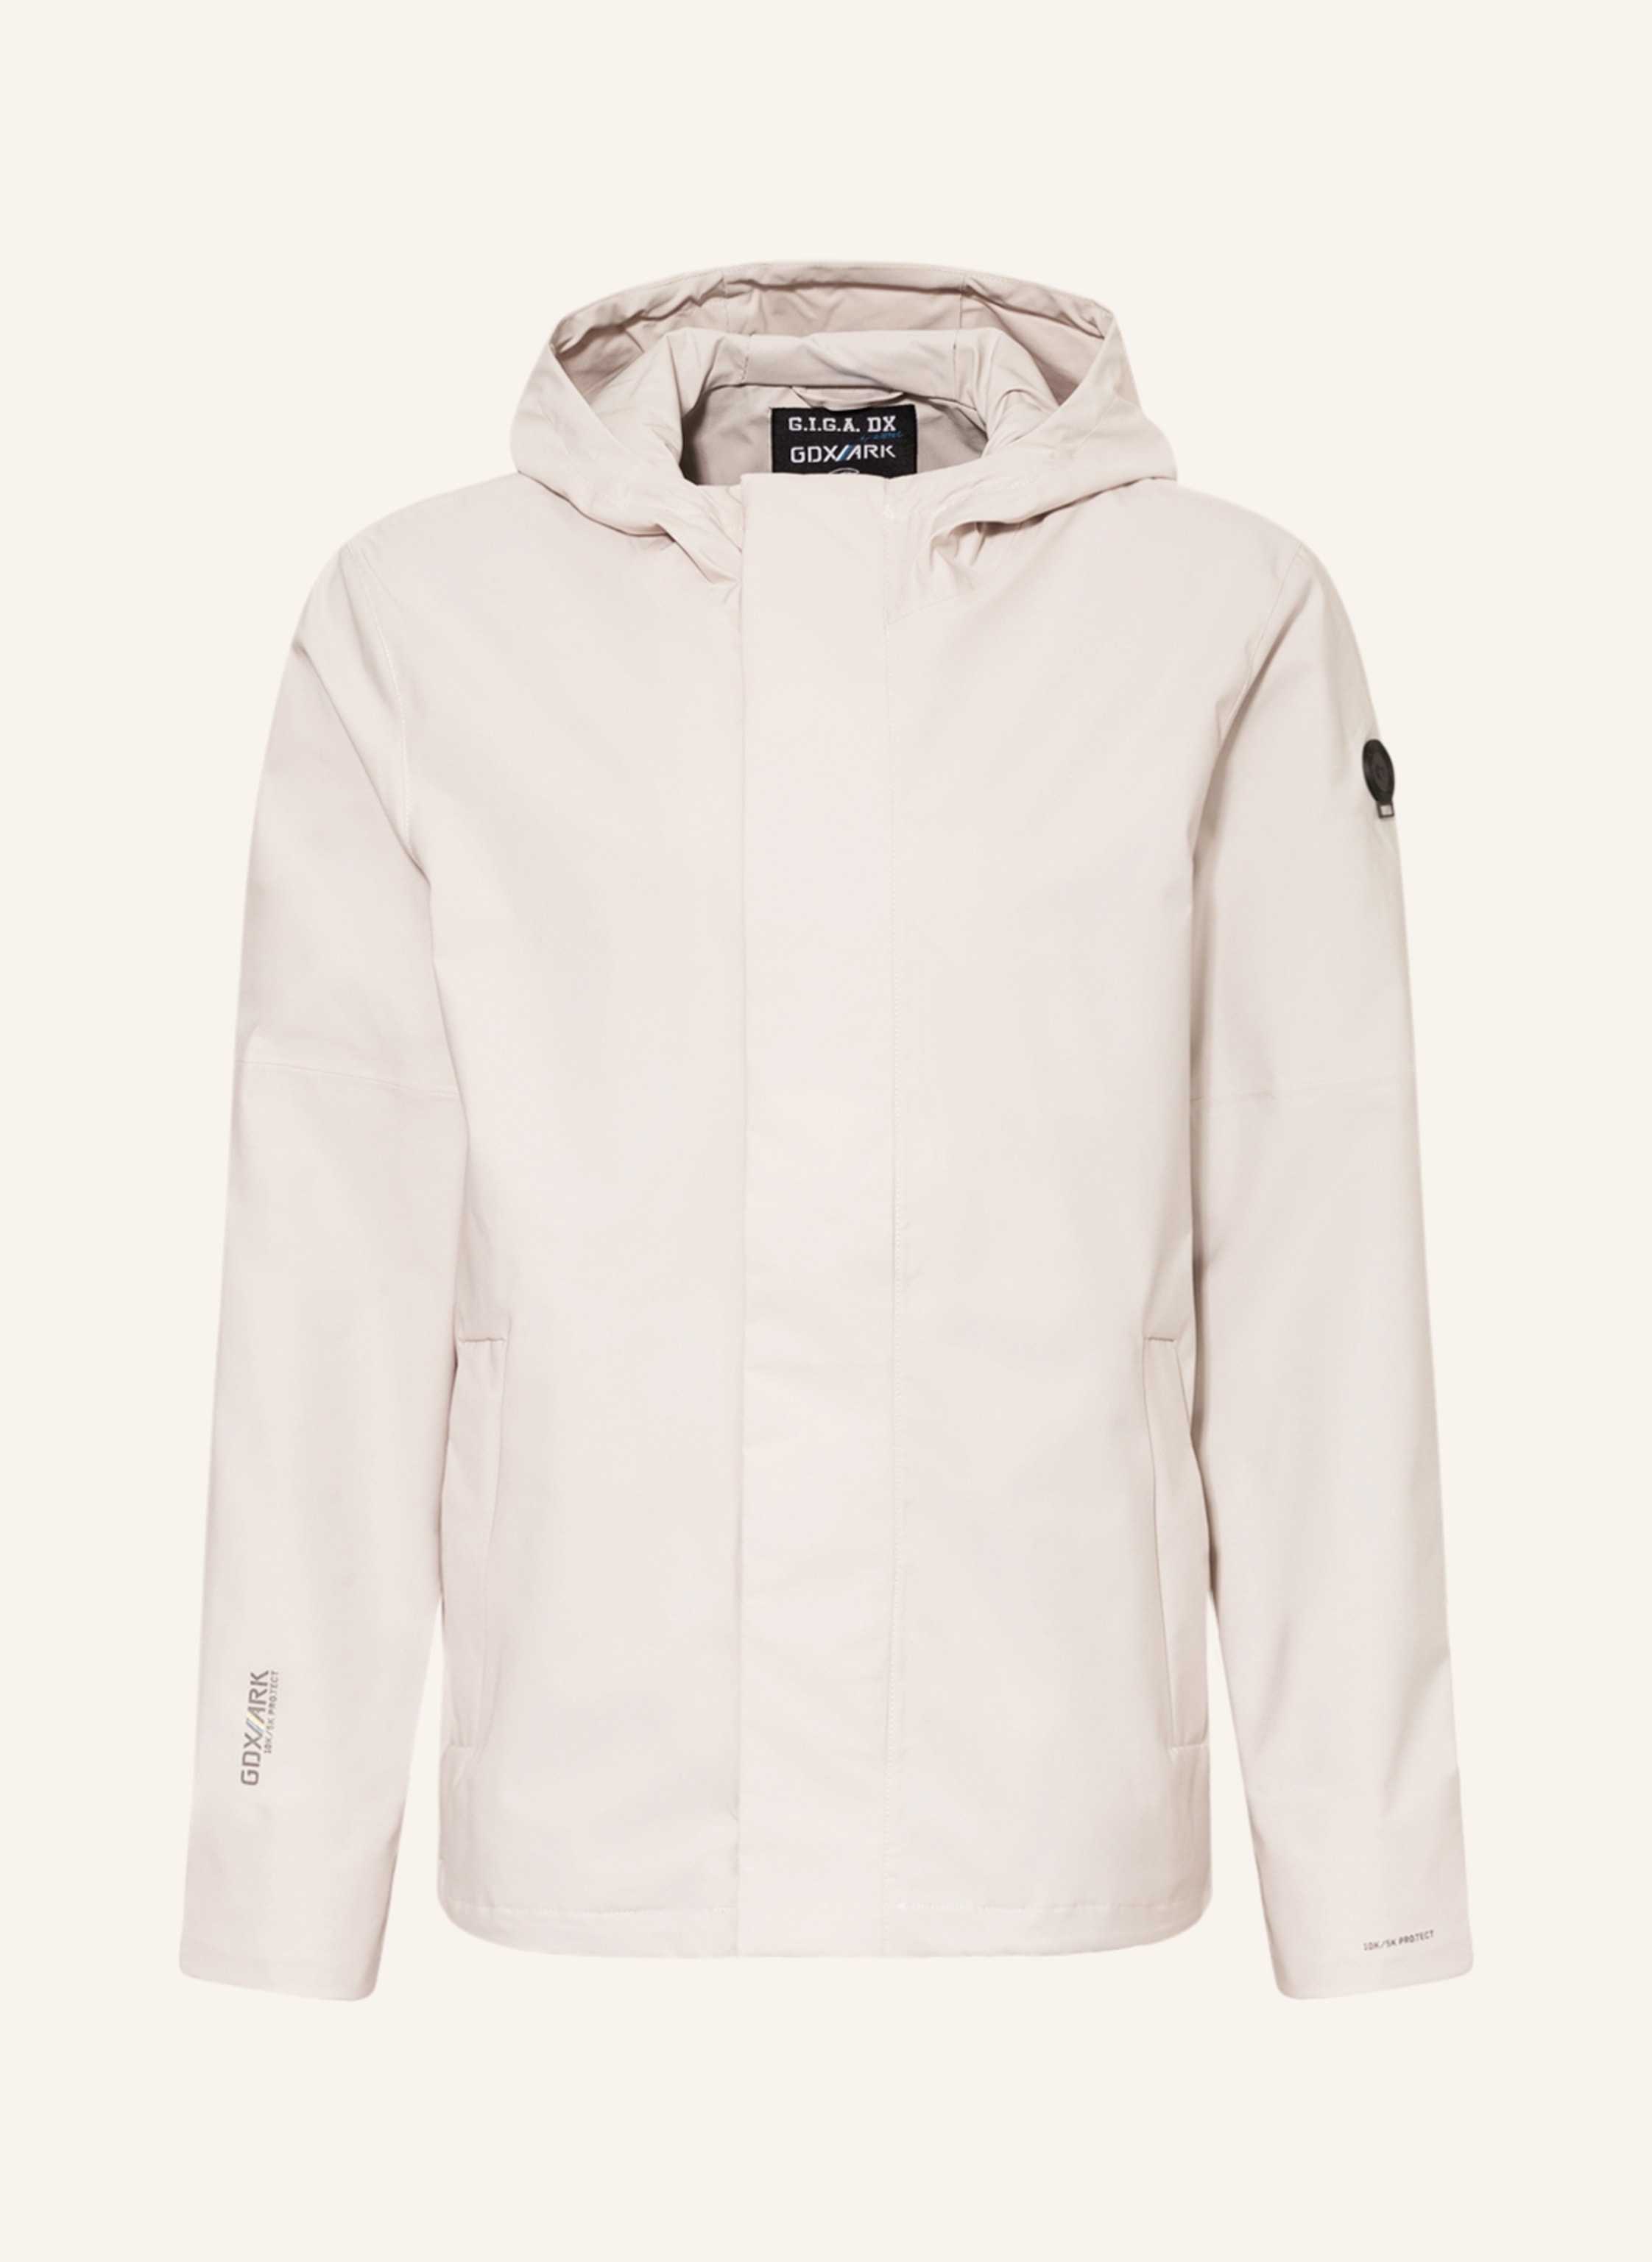 G.I.G.A. DX by killtec Outdoor jacket GS 147 in cream